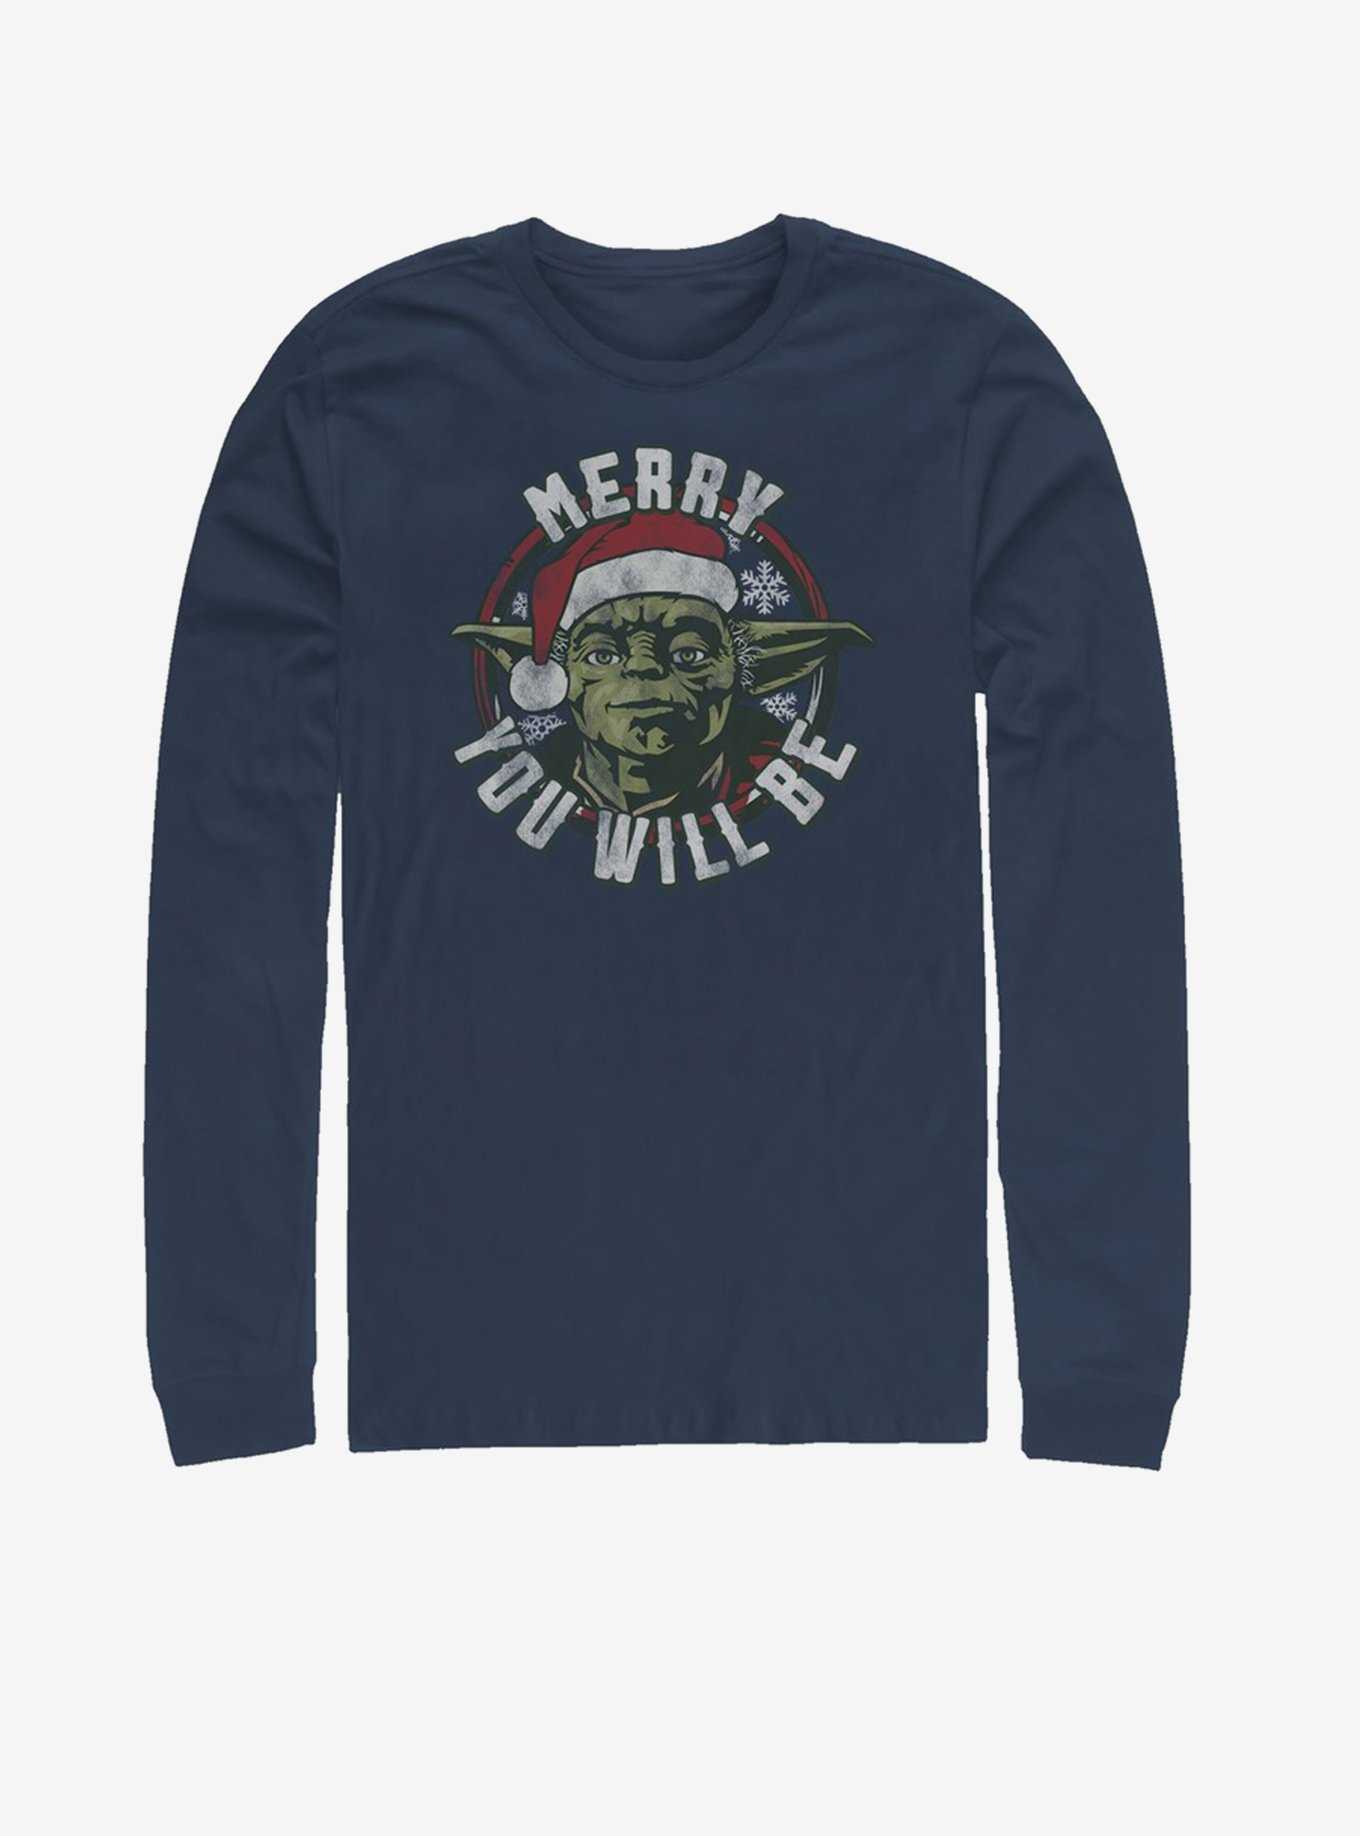 Star Wars Believe You Must Long-Sleeve T-Shirt, , hi-res